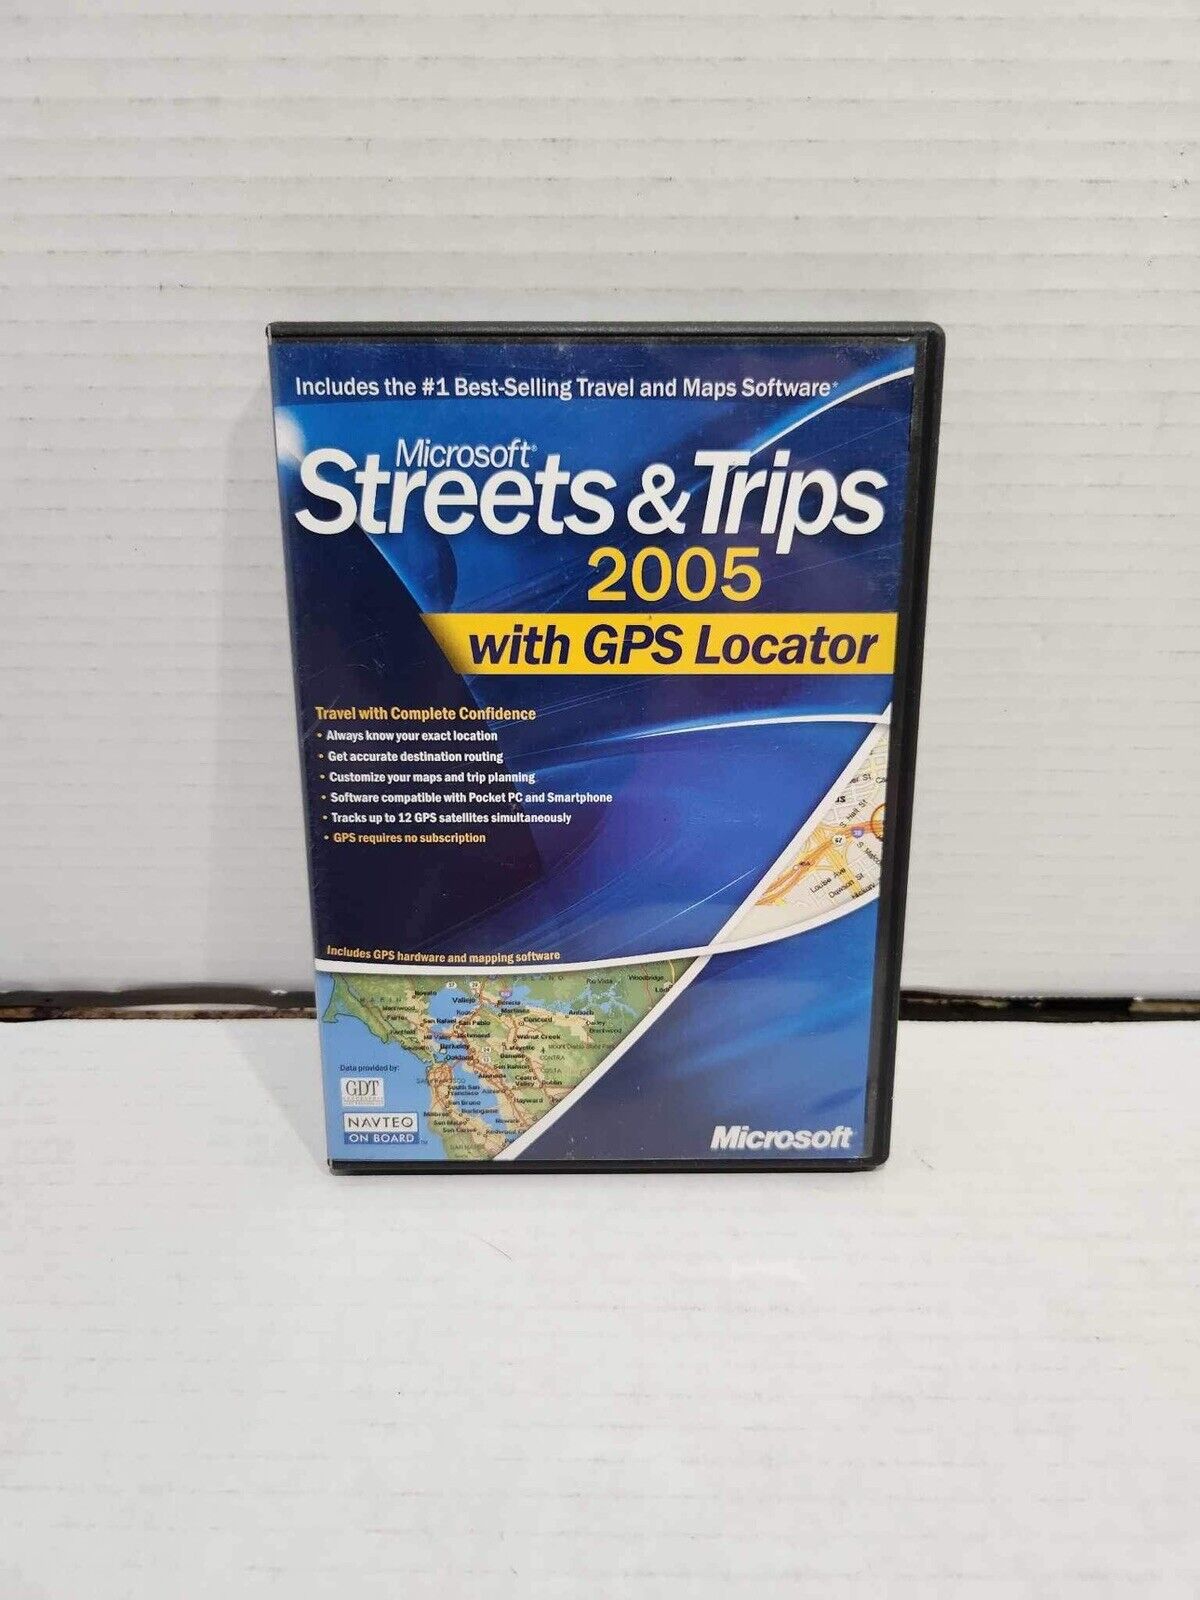 Microsoft Streets and Trips 2005 | For Windows XP. Software only